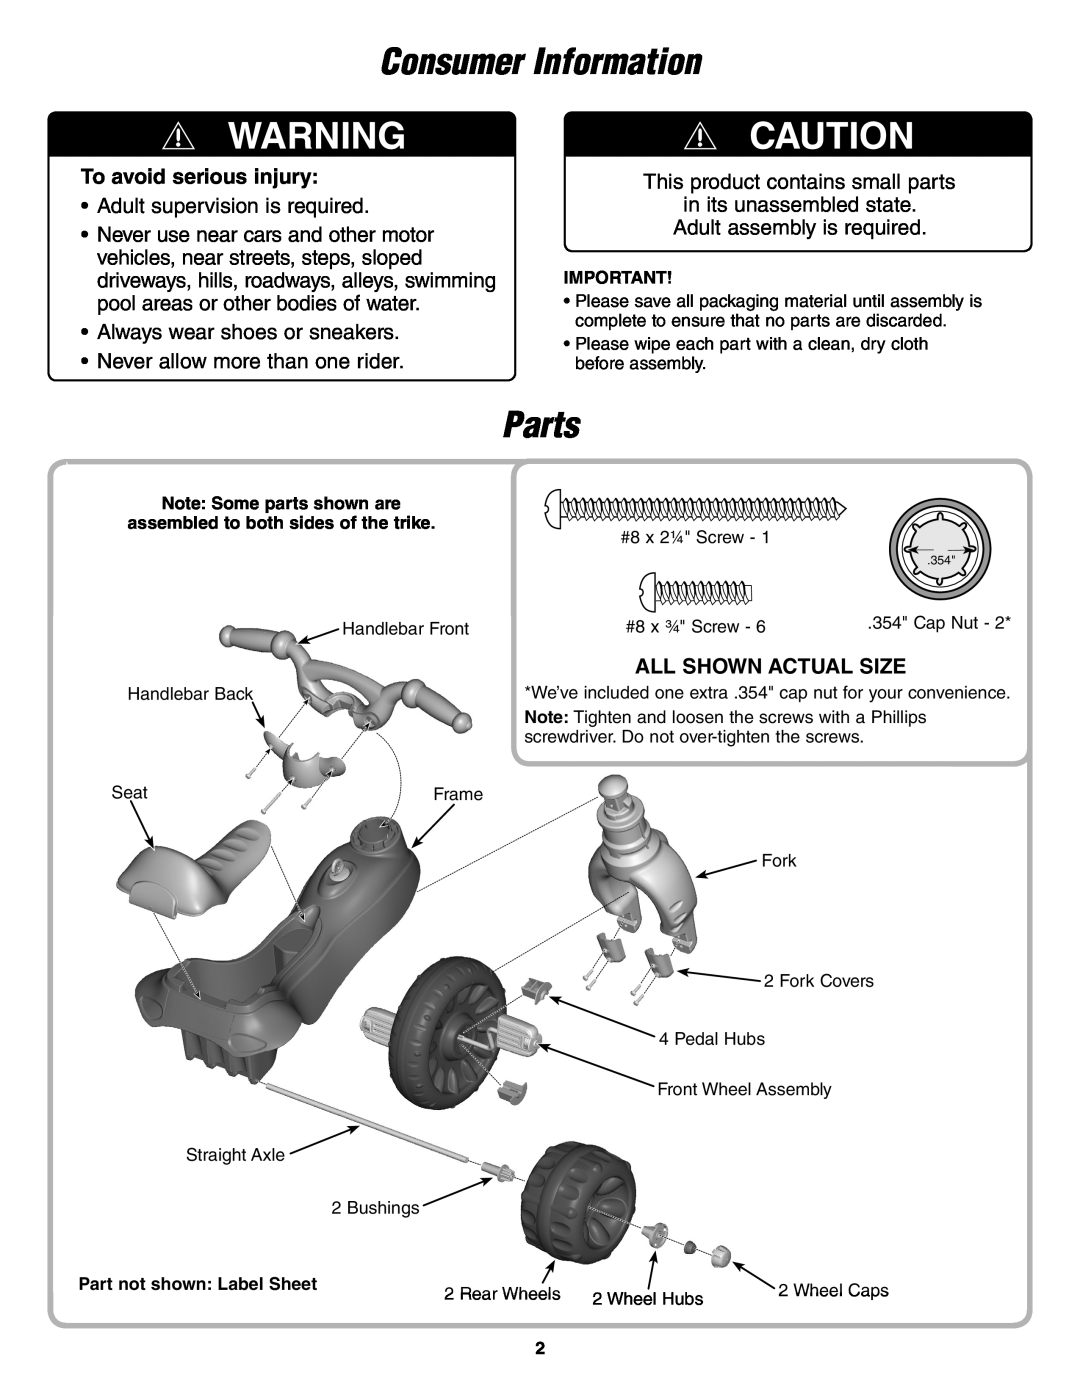 Fisher-Price N6021 instruction sheet Consumer Information, Parts, To avoid serious injury, All Shown Actual Size 